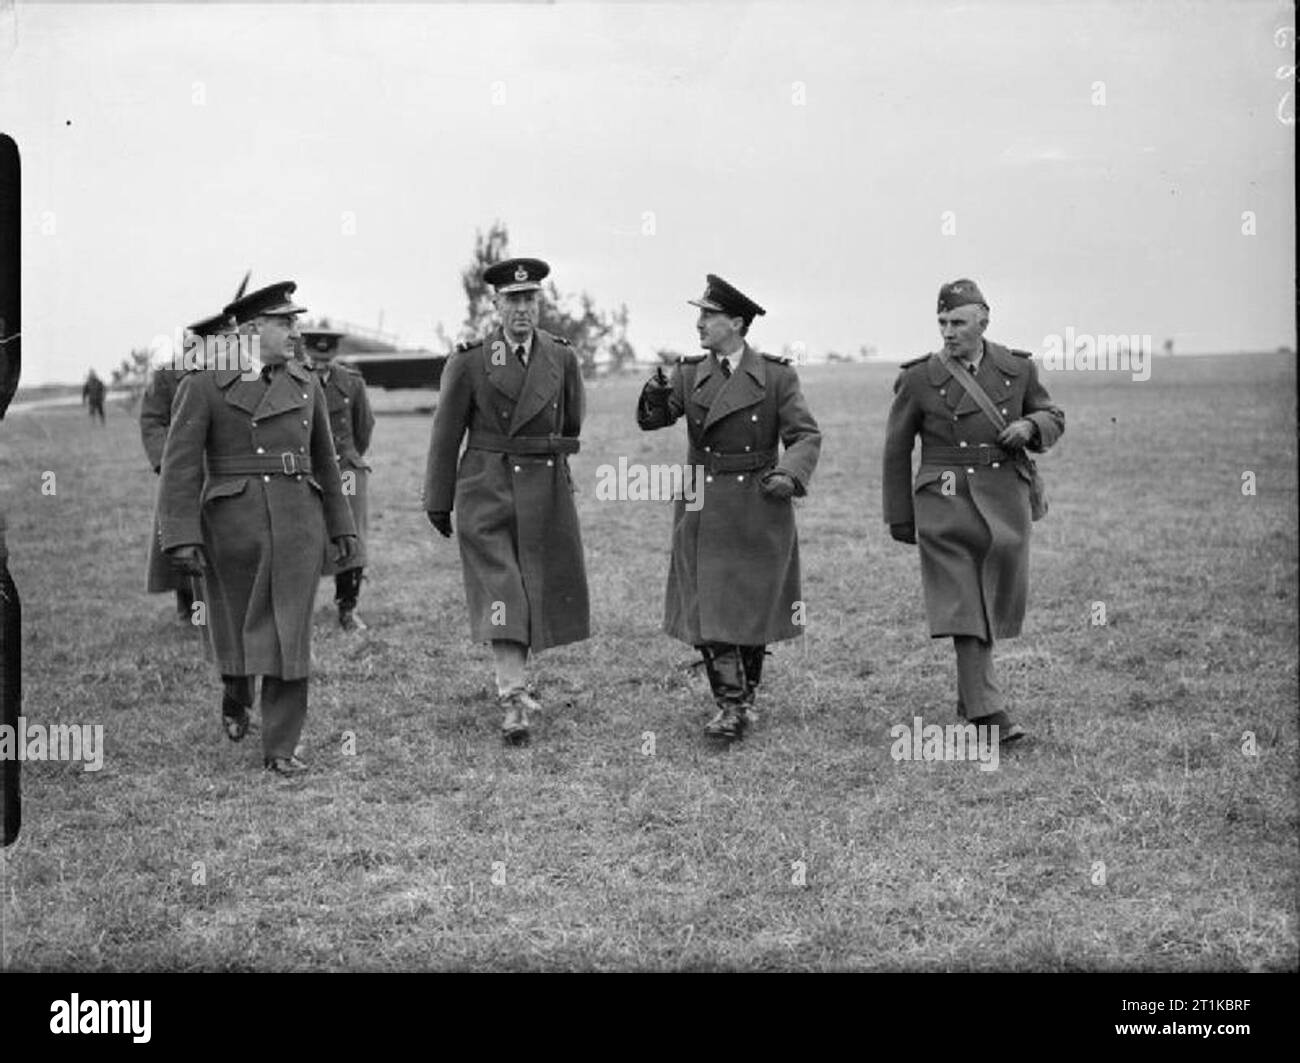 Royal Air Force- France 1939-1940. Air Chief Marshal Sir Cyril Newall, Chief of the Air Staff (third left), accompanied by Air Commodore Lord Londonderry and Air Vice Marshal P H L Playfair, Air Officer Commanding the Advanced Air Striking Force (first left), on an airfield during his tour of RAF units in France. Stock Photo